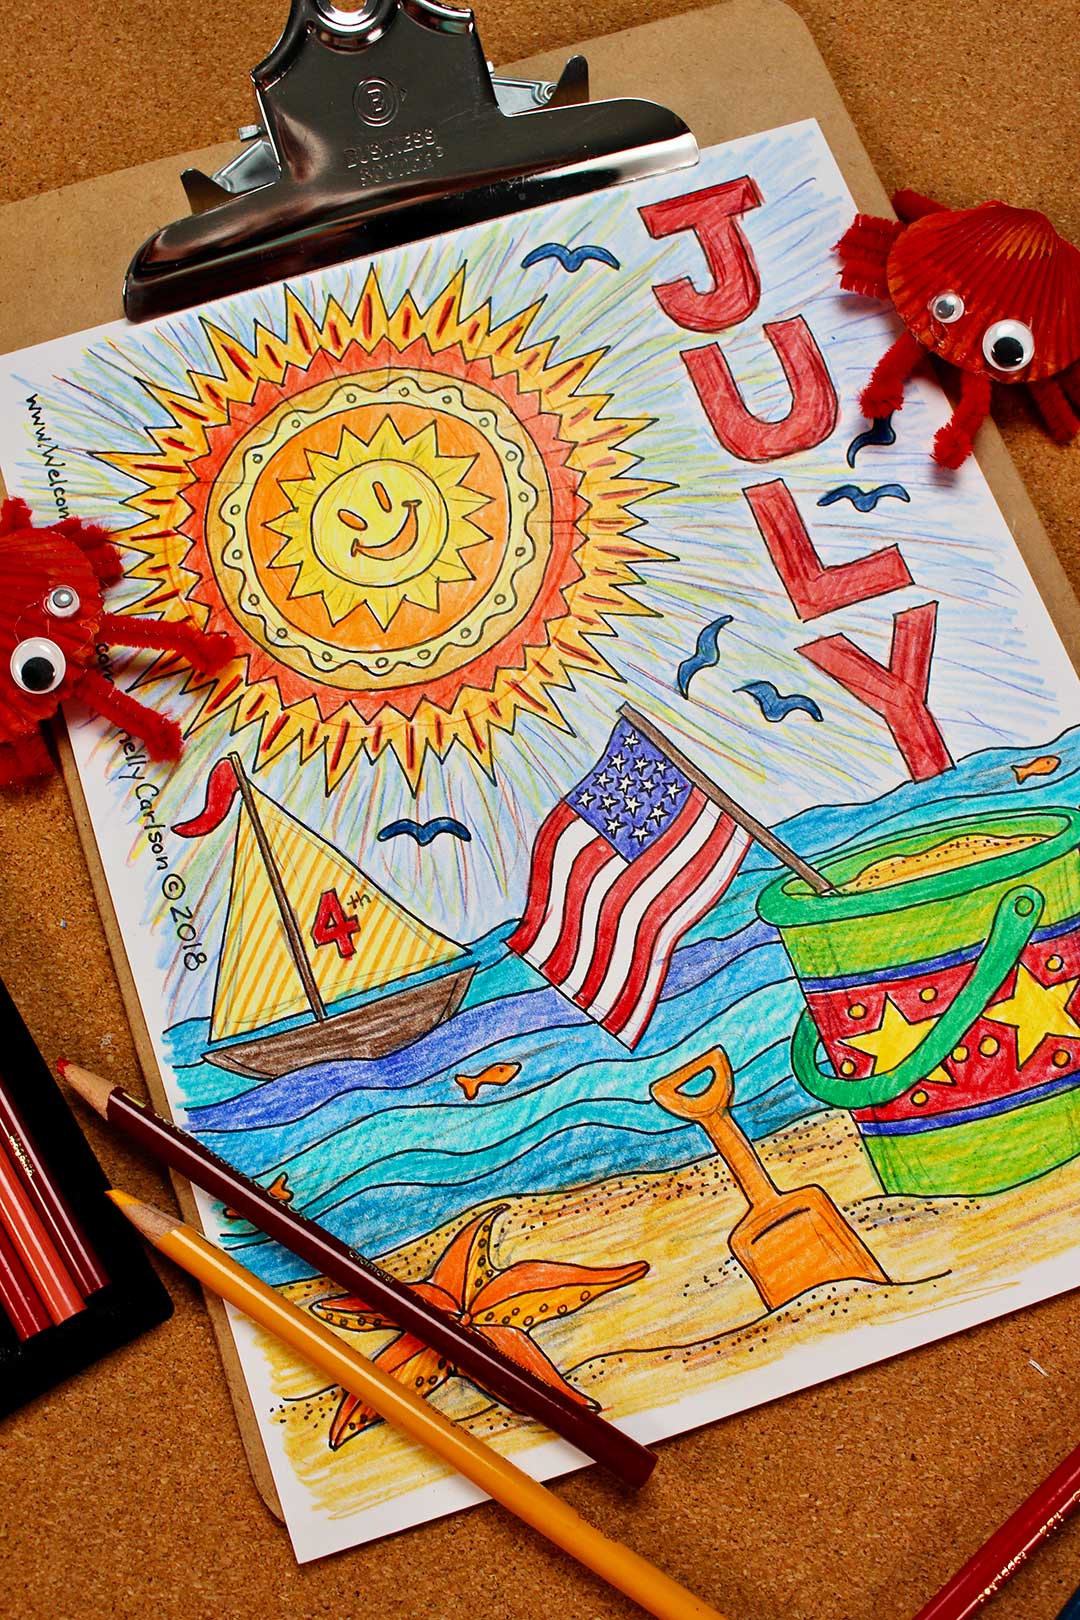 Watercolor Resist with Crayons for July 4th - Welcome To Nana's